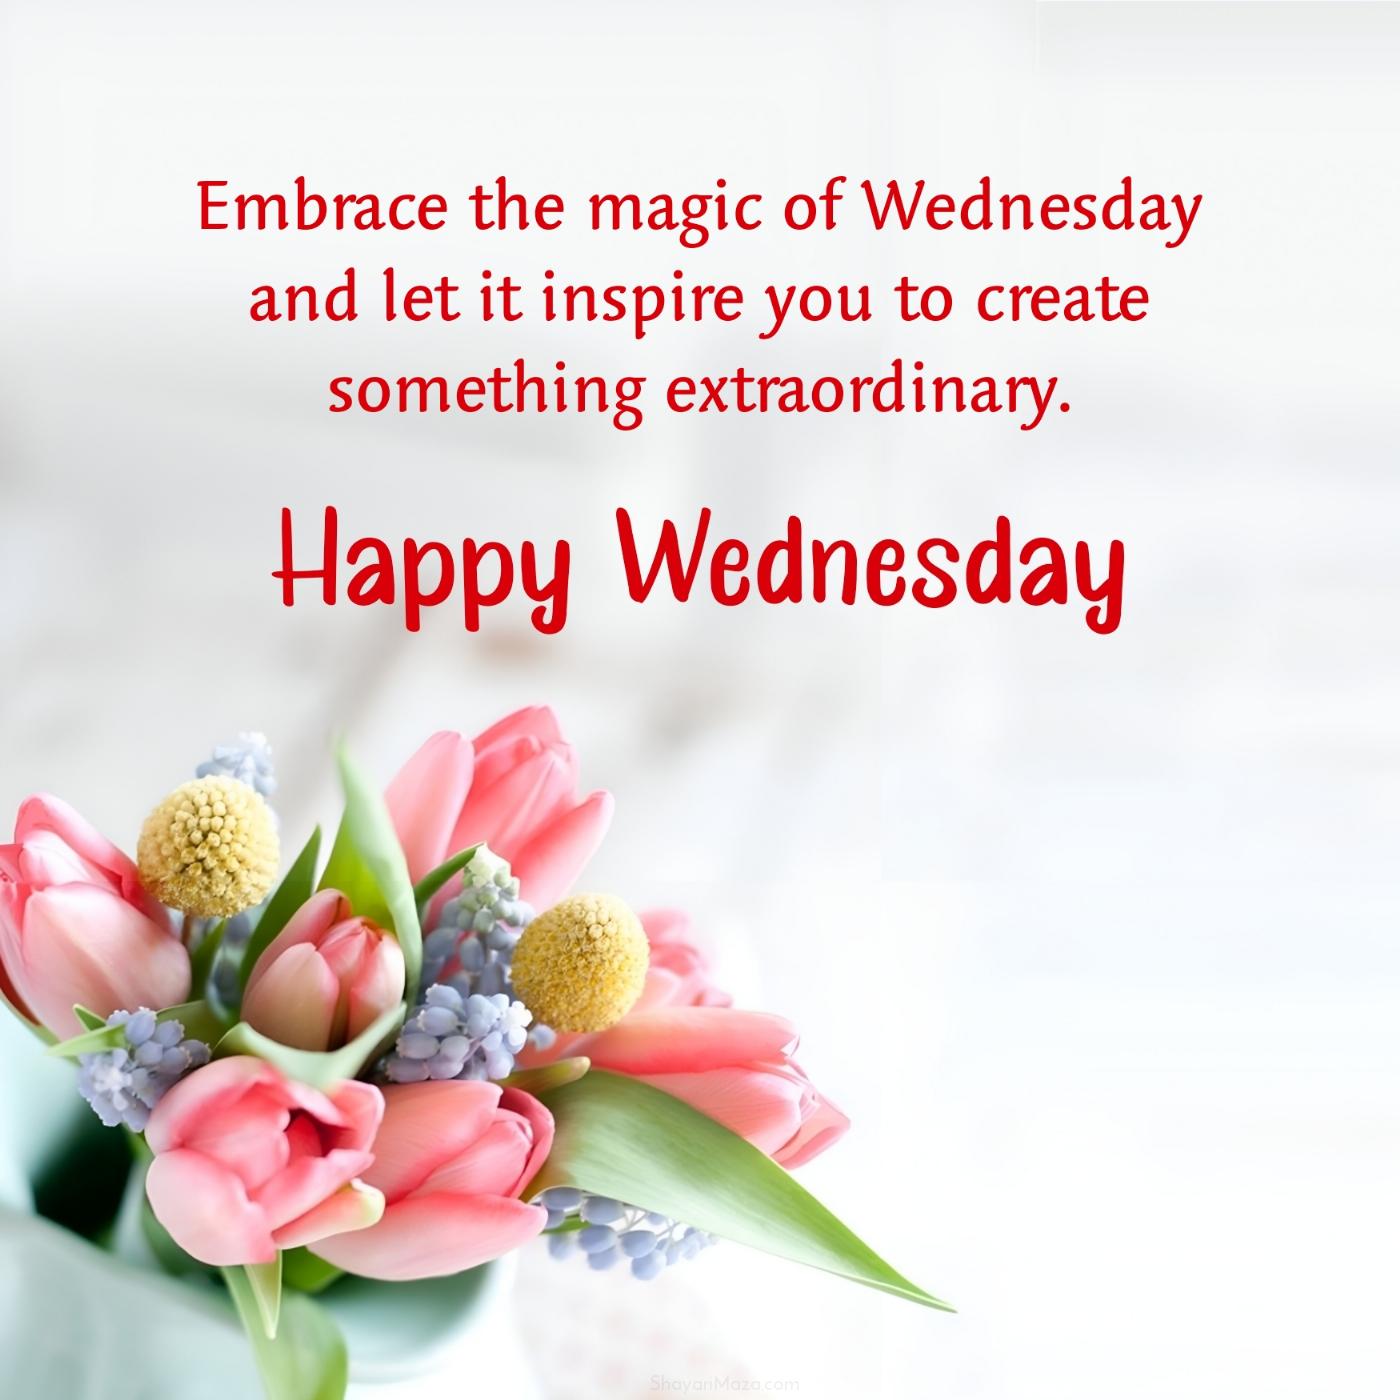 Embrace the magic of Wednesday and let it inspire you to create something extraordinary